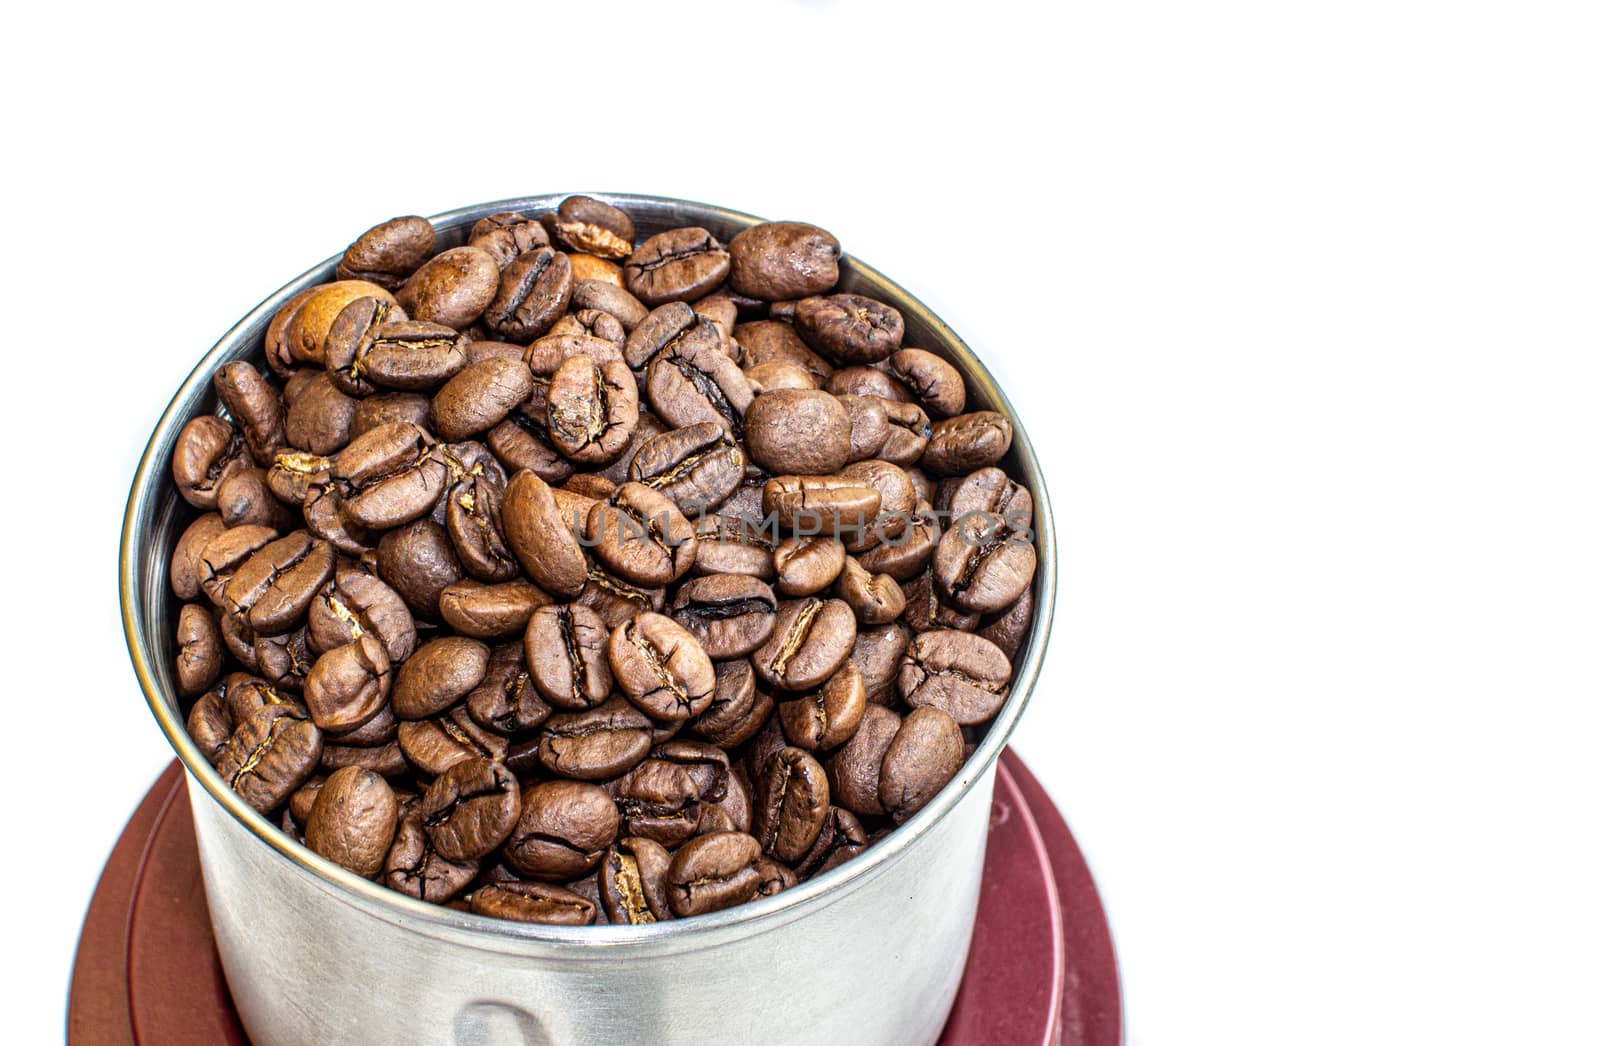 A lot of coffee beans in a metal coffee grinder on a white background. Isolated coffee items